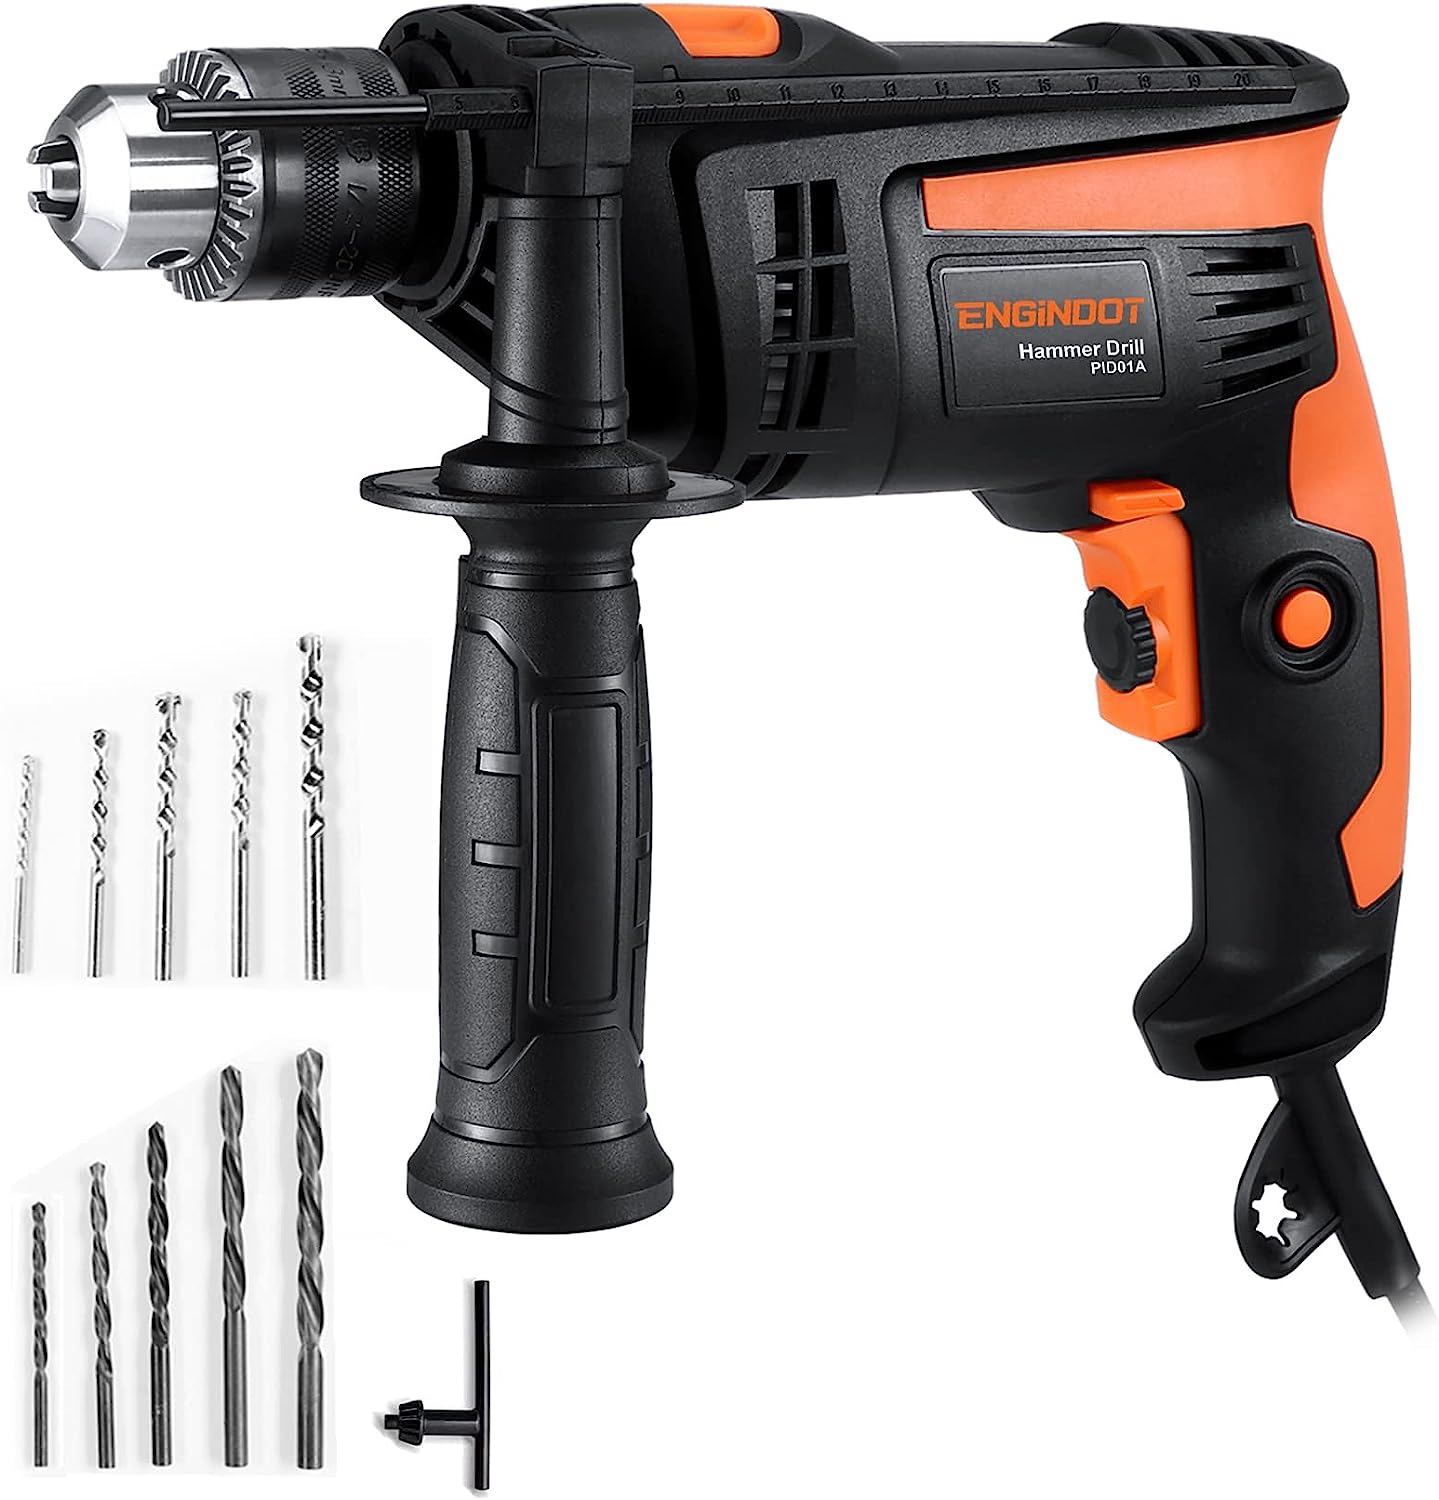 ENGiNDOT Hammer Drill, 1/2-Inch 6-AMP Corded Electric [...]